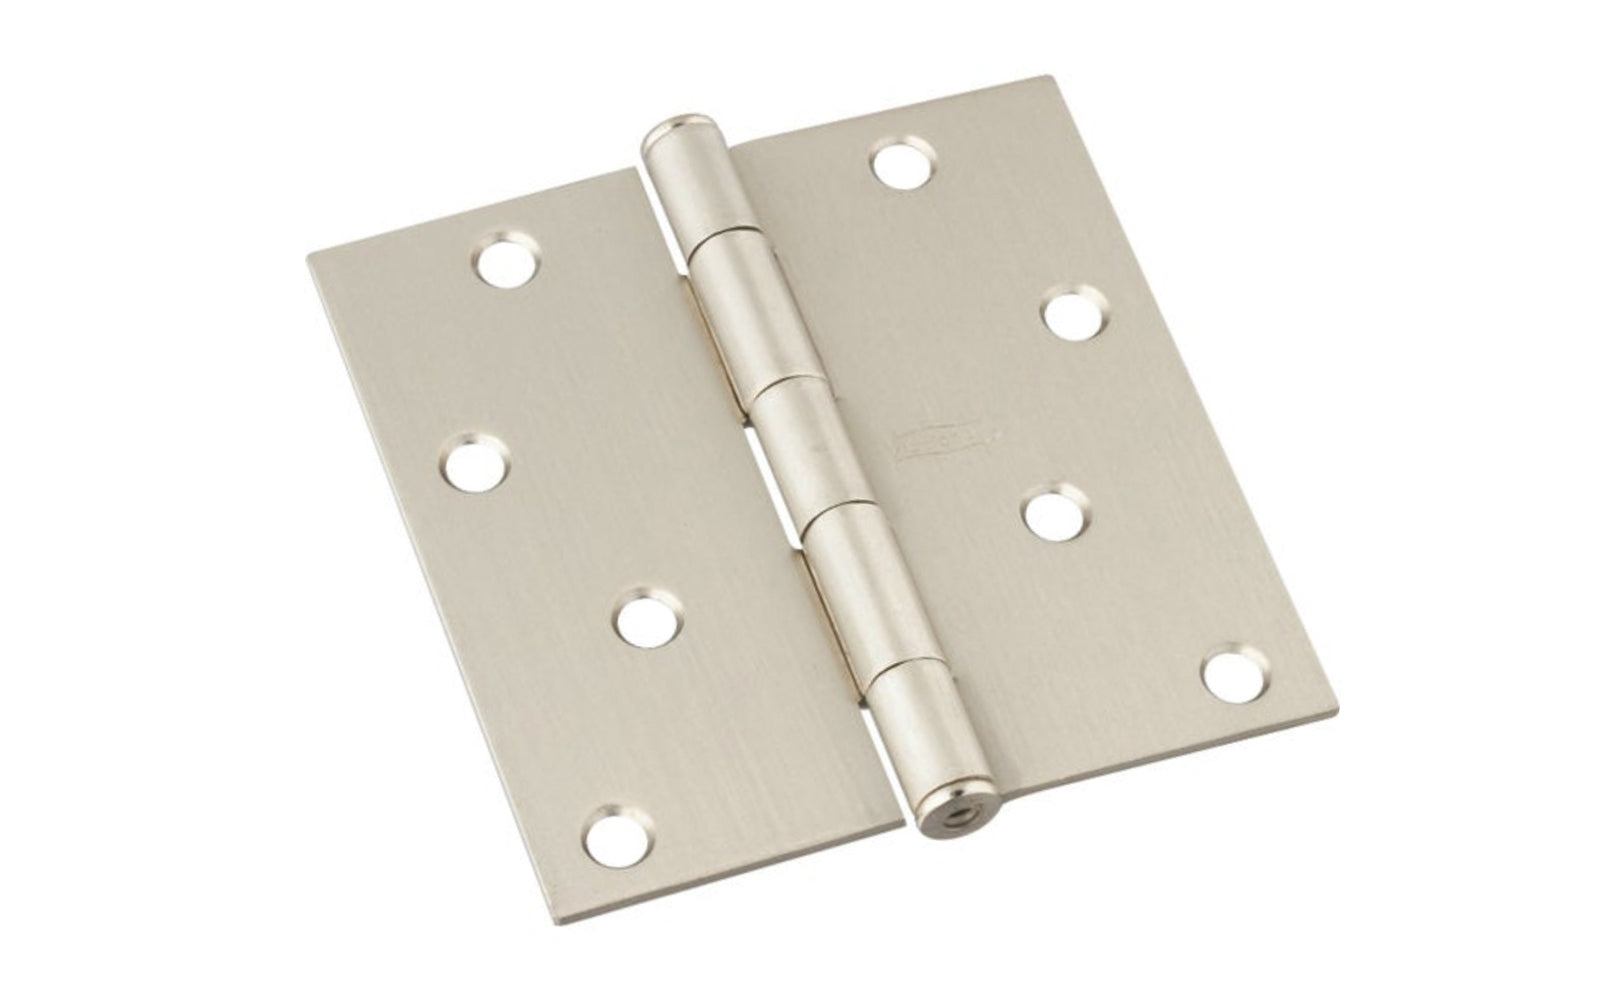 4" Satin Nickel Door Hinge with square corners & a removable pin. Satin nickel finish on steel material. Countersunk holes. Includes flat head screws. National Hardware Model No. N830-249.